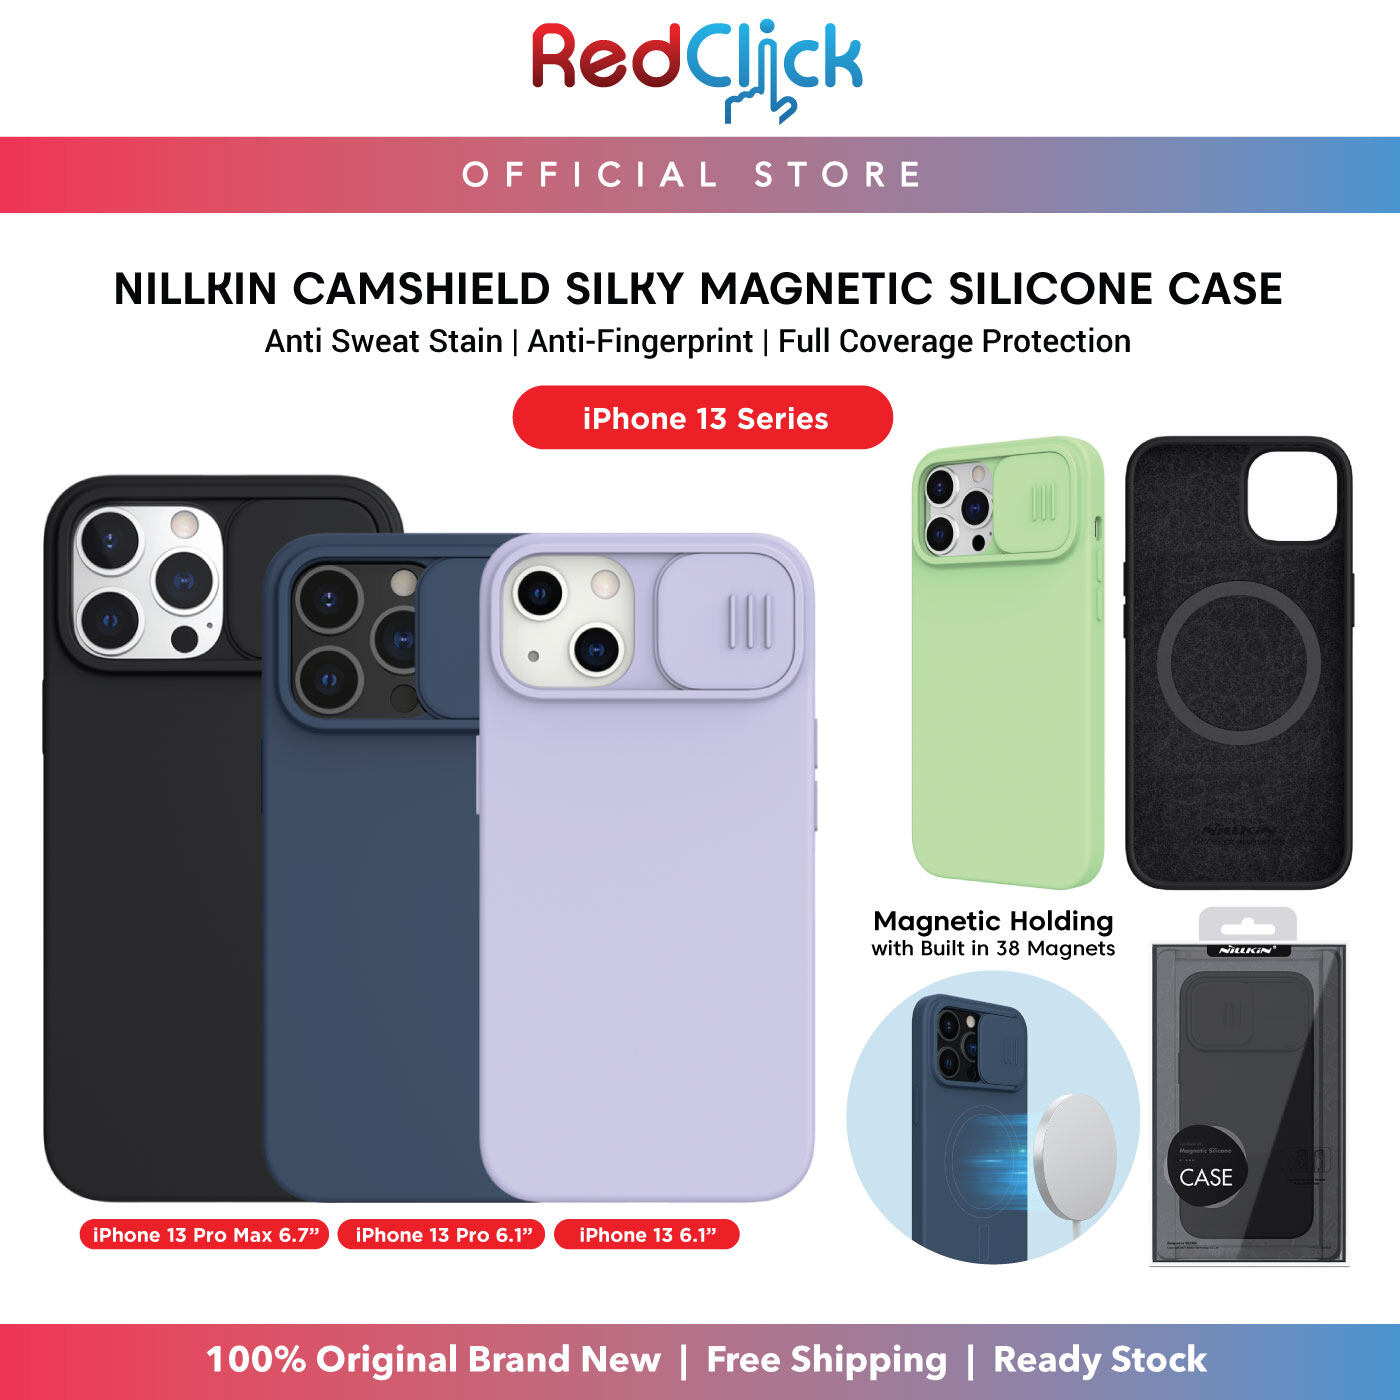 Nillkin  Camshield Silky Magnetic /Camshield Silky Case for iPh 13 /13 Pro /13 Pro Max /12/ 12 Pro /12 Pro Max Slide Cover For Camera Protection Silicone Back Case